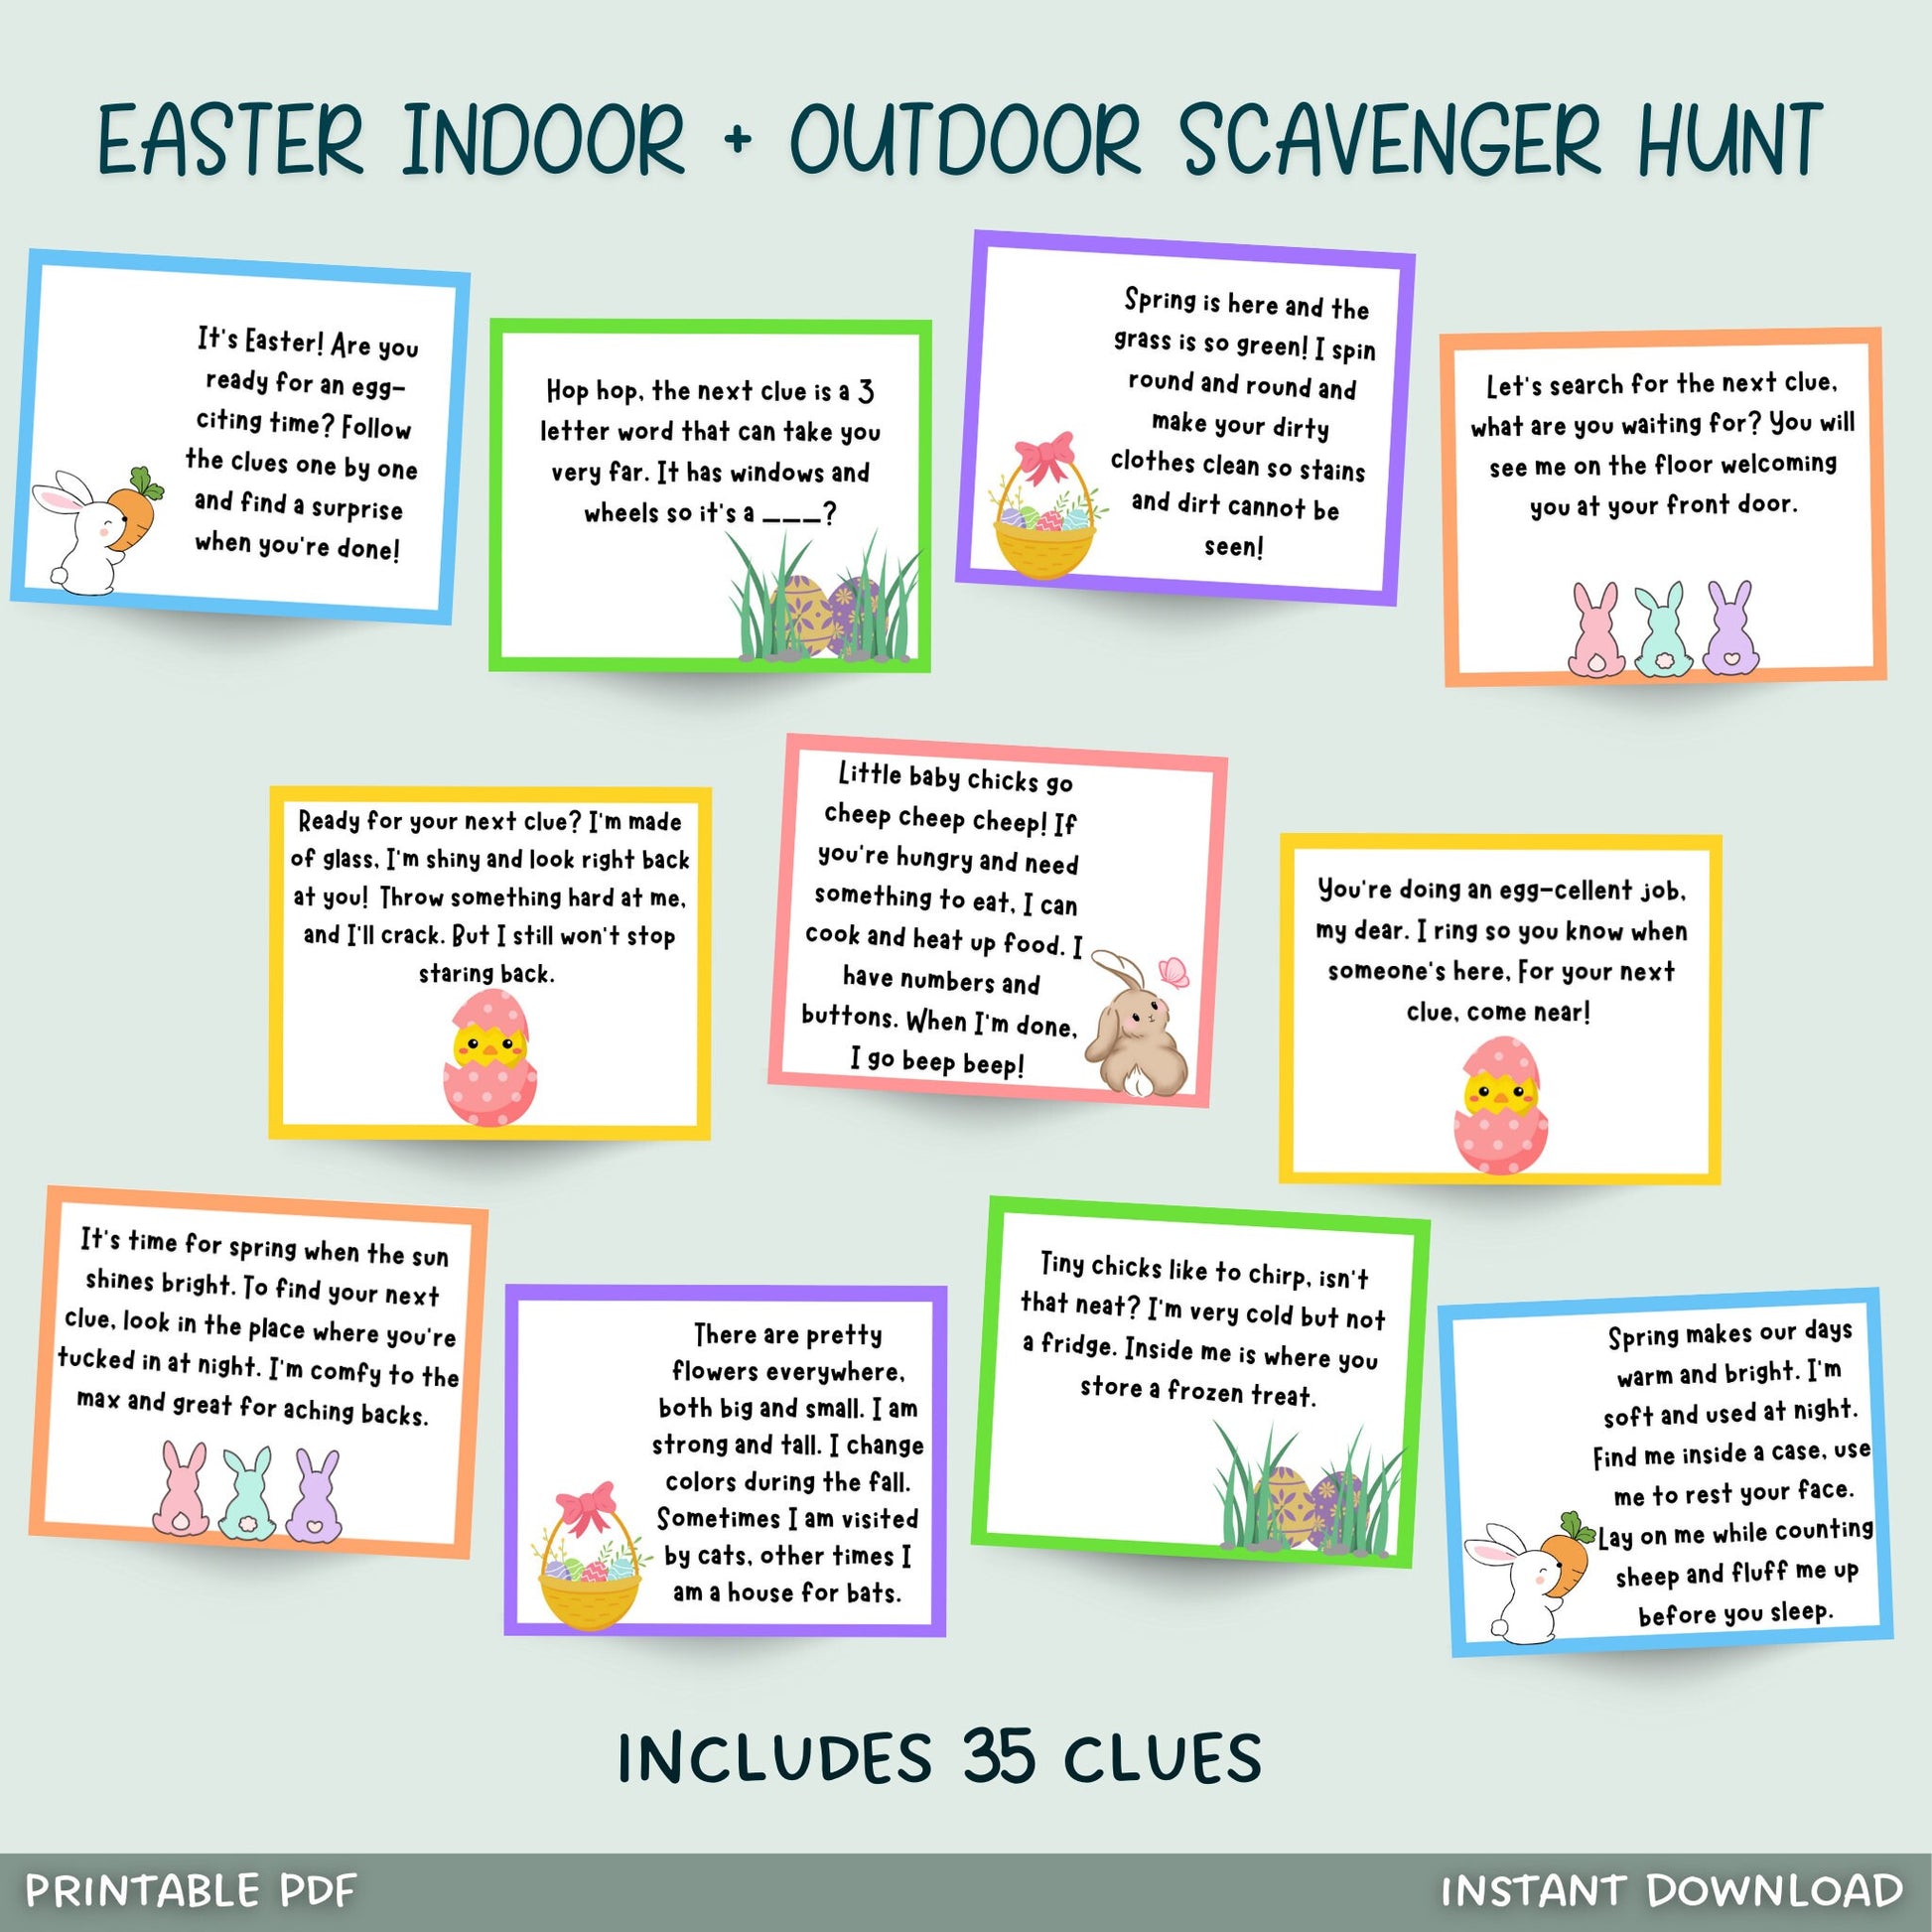 This indoor and outdoor Easter scavenger hunt is printable & an instant download! Send your kids on this fun mission searching all around with these 35 clues. Hide an easter egg with each clue or include a special present at the end! Just print & use